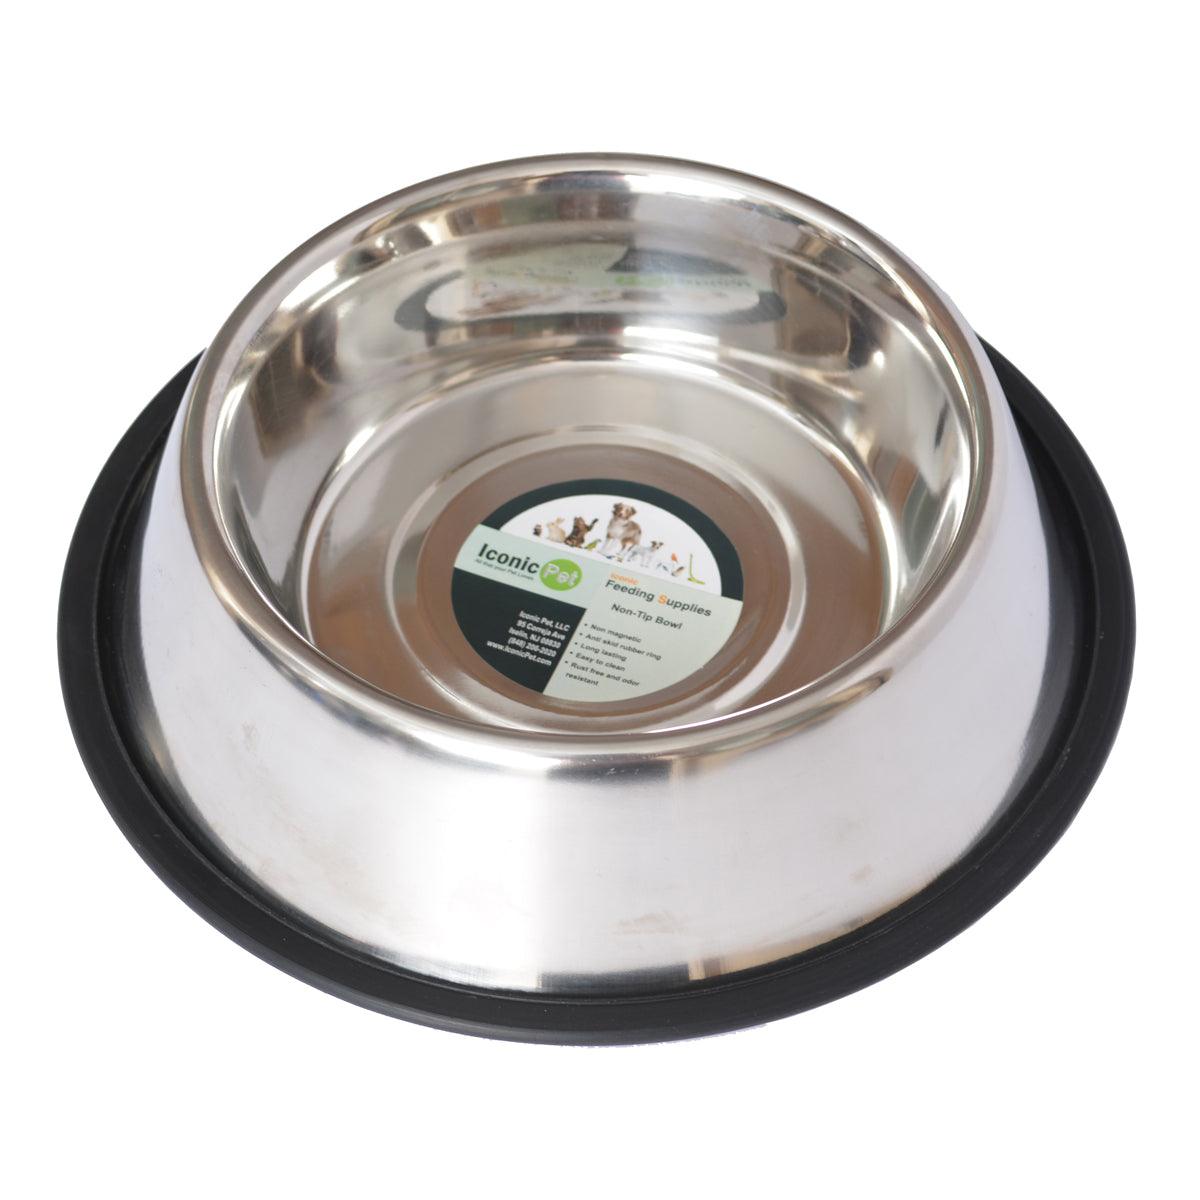 Stainless Steel Non-Skid Pet Bowl for Dog or Cat - Iconic Pet, LLC